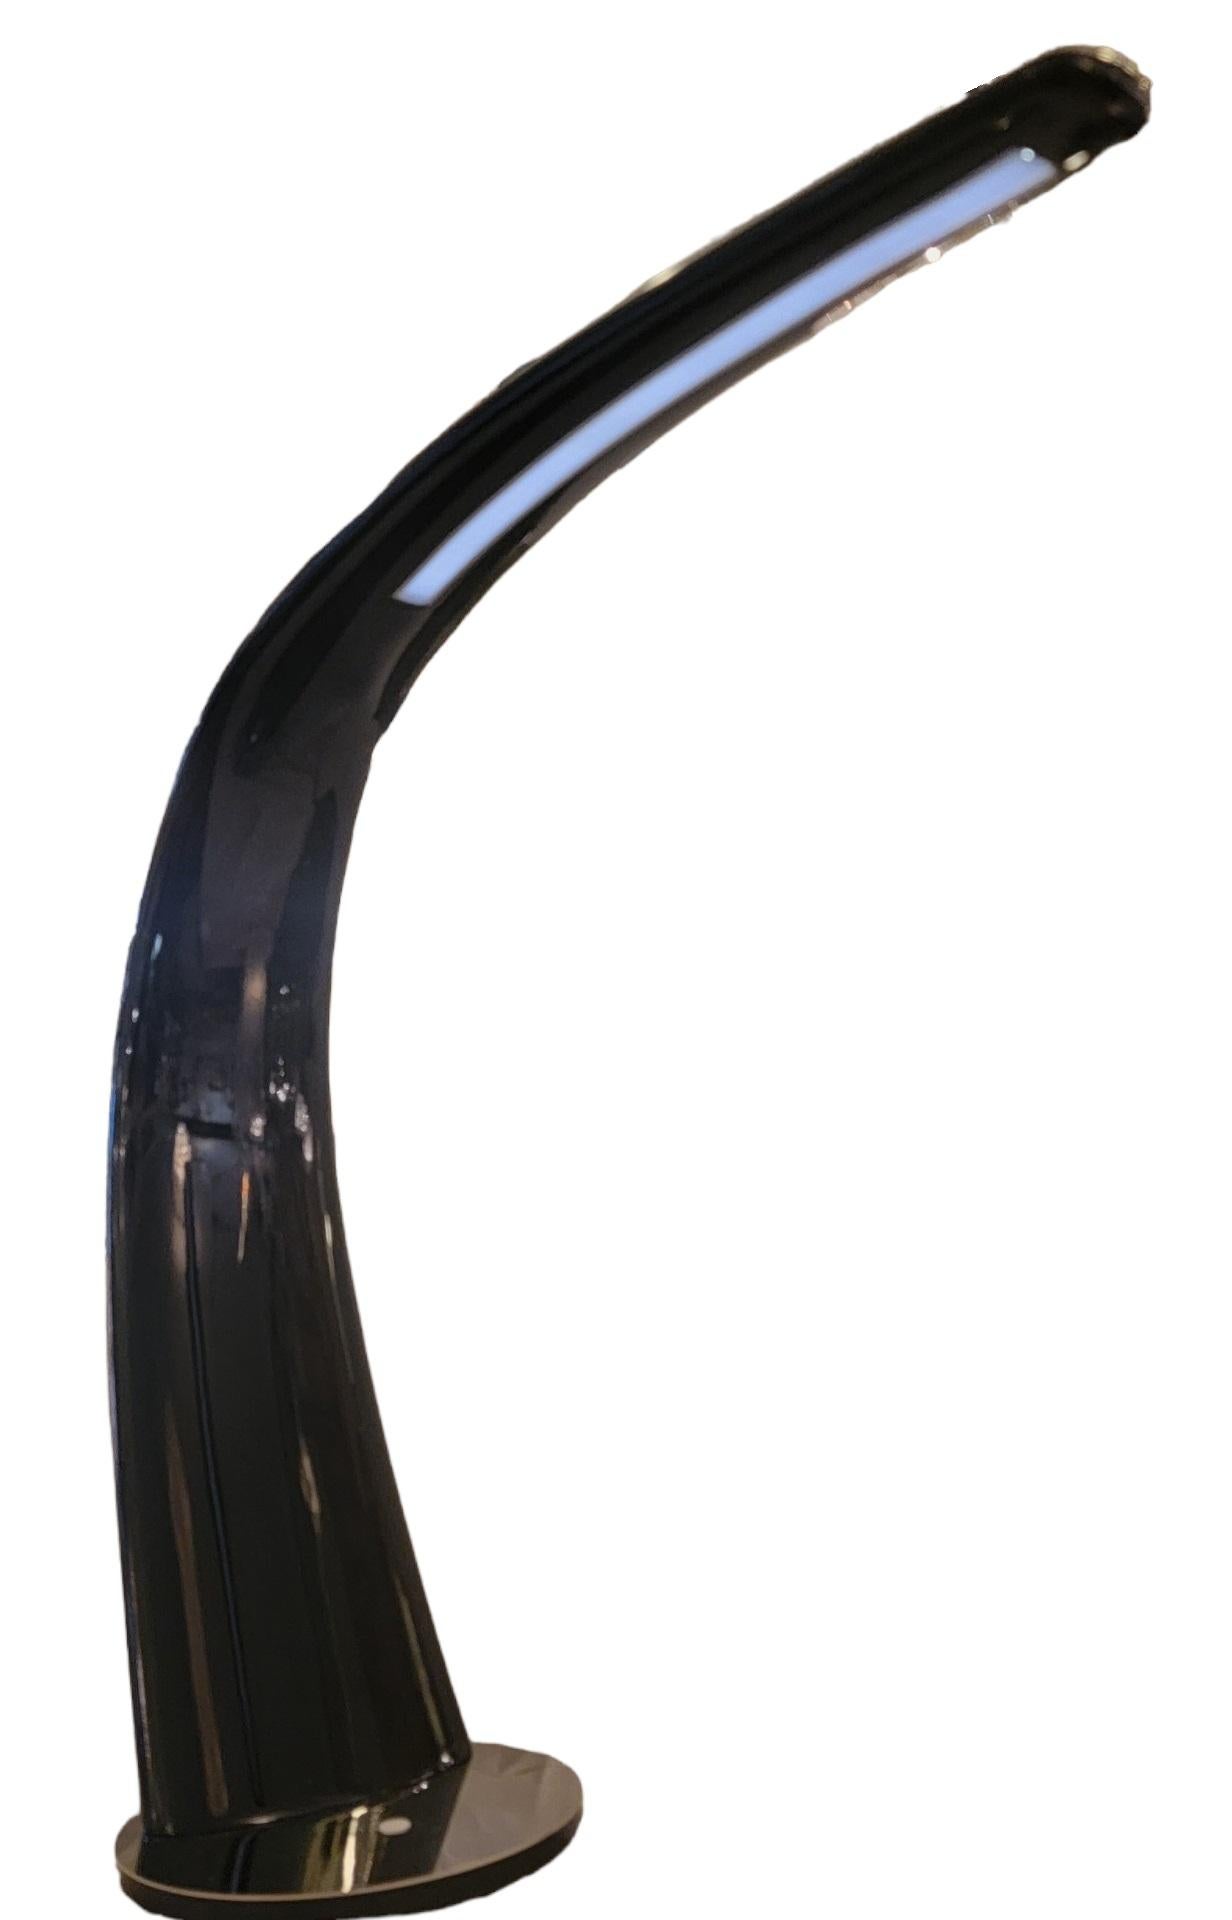 Italian Cattelan Lacquered Arm Table Lamp mamba design By Piero De Longhi for Cattelan Italia. Measures approx - 24.5h x 7.5w 26.5l

On label it says -
110-230v 50-60hz